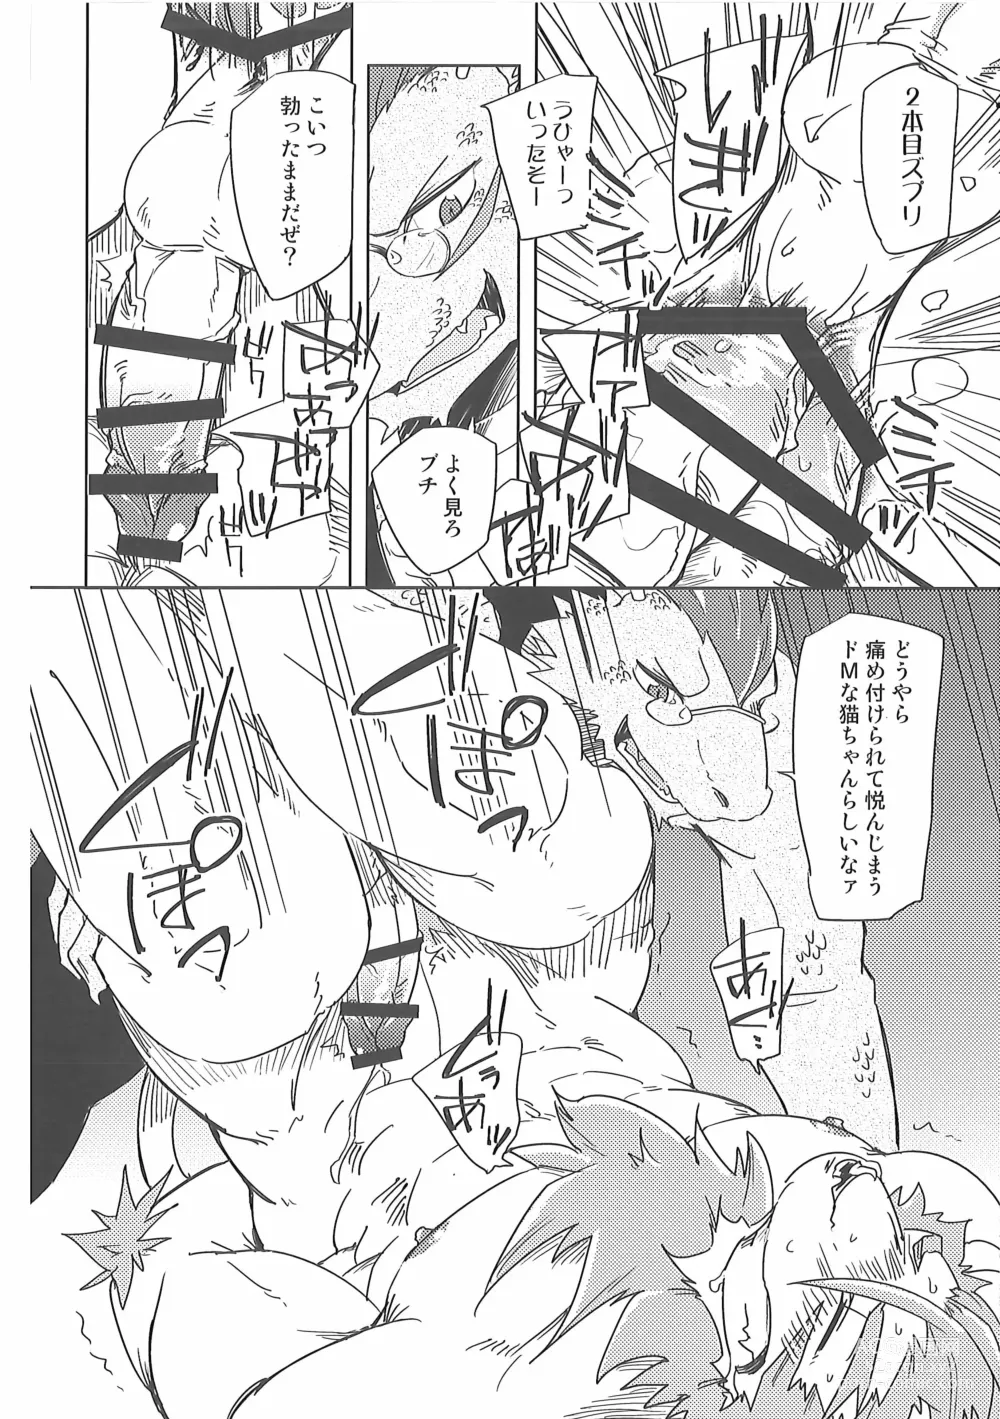 Page 28 of doujinshi Water under The Bridge 1